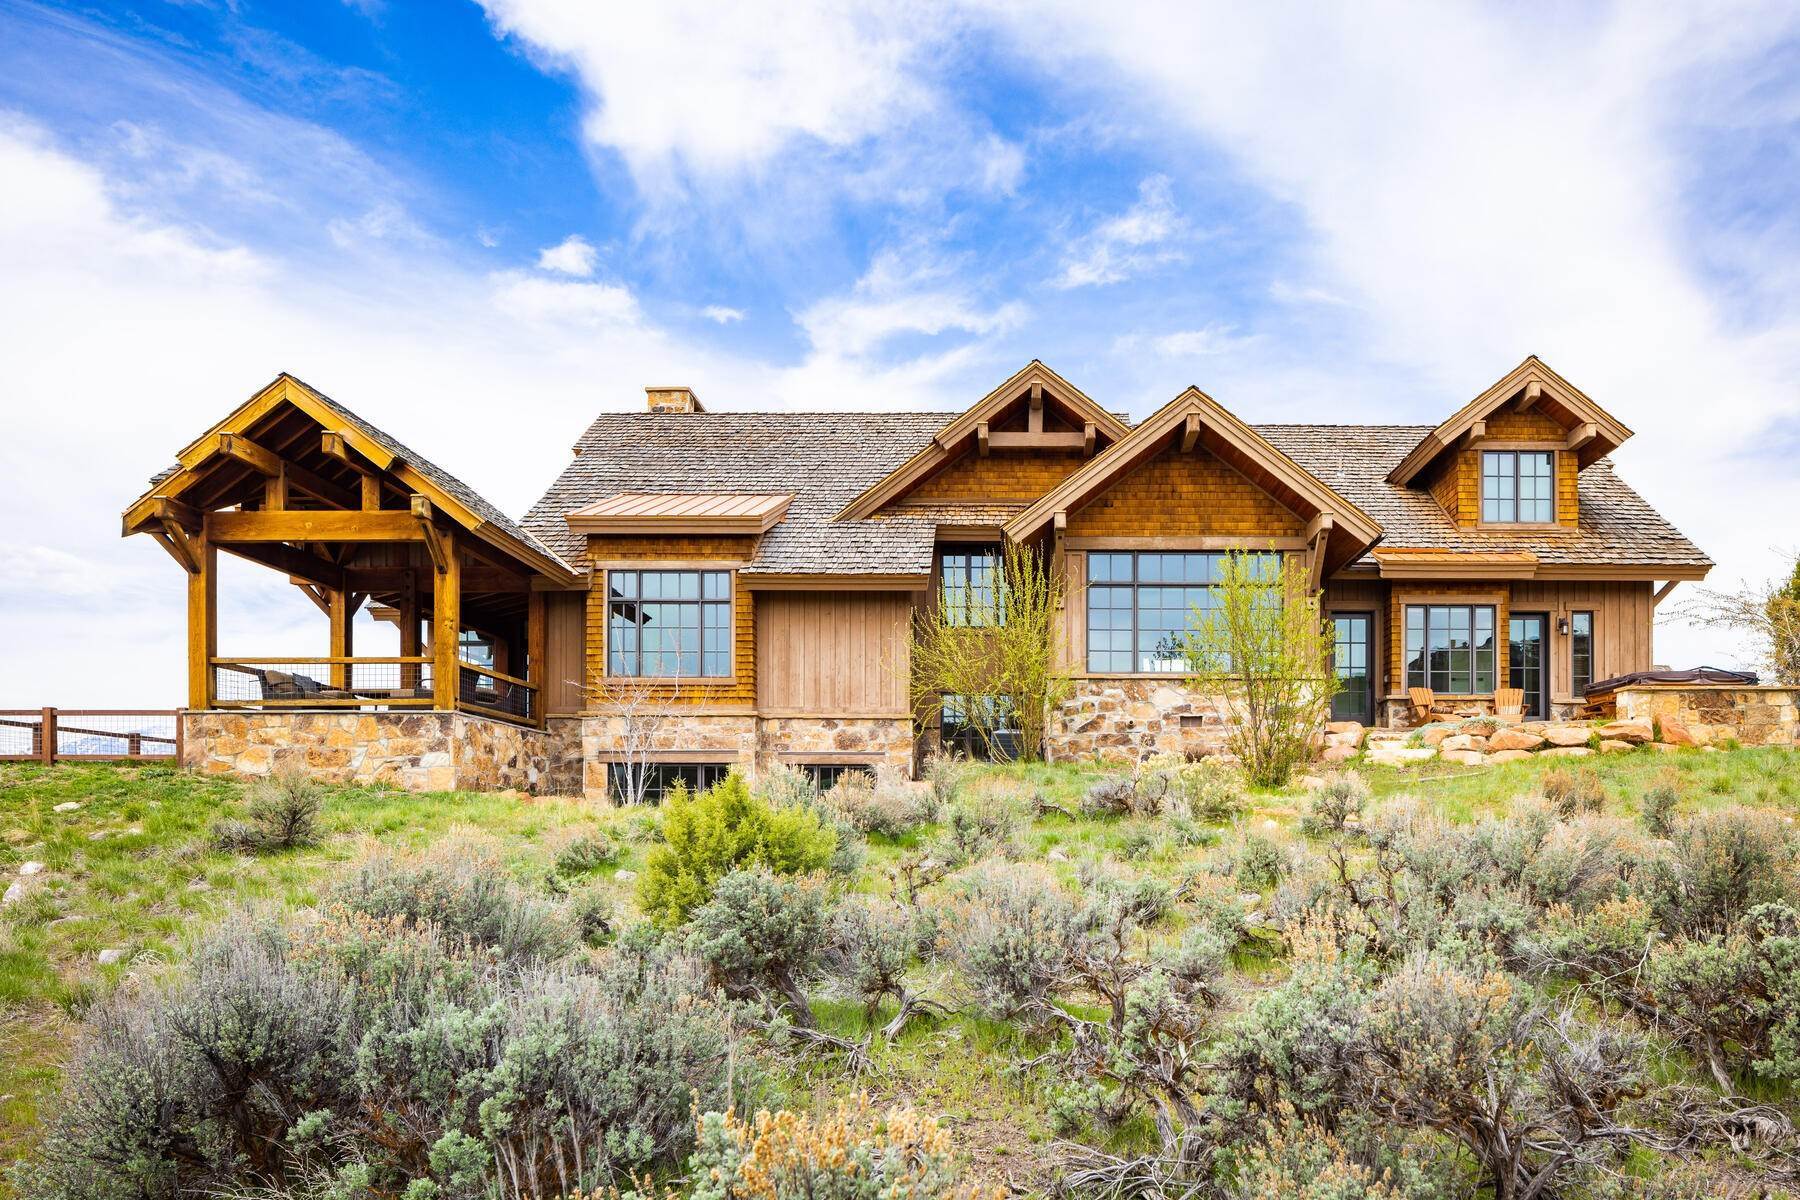 Property for Sale at Great Entertaining Home Offering Multiple Outdoor Living Spaces And Views 940 N Chimney Rock Road Heber City, Utah 84032 United States